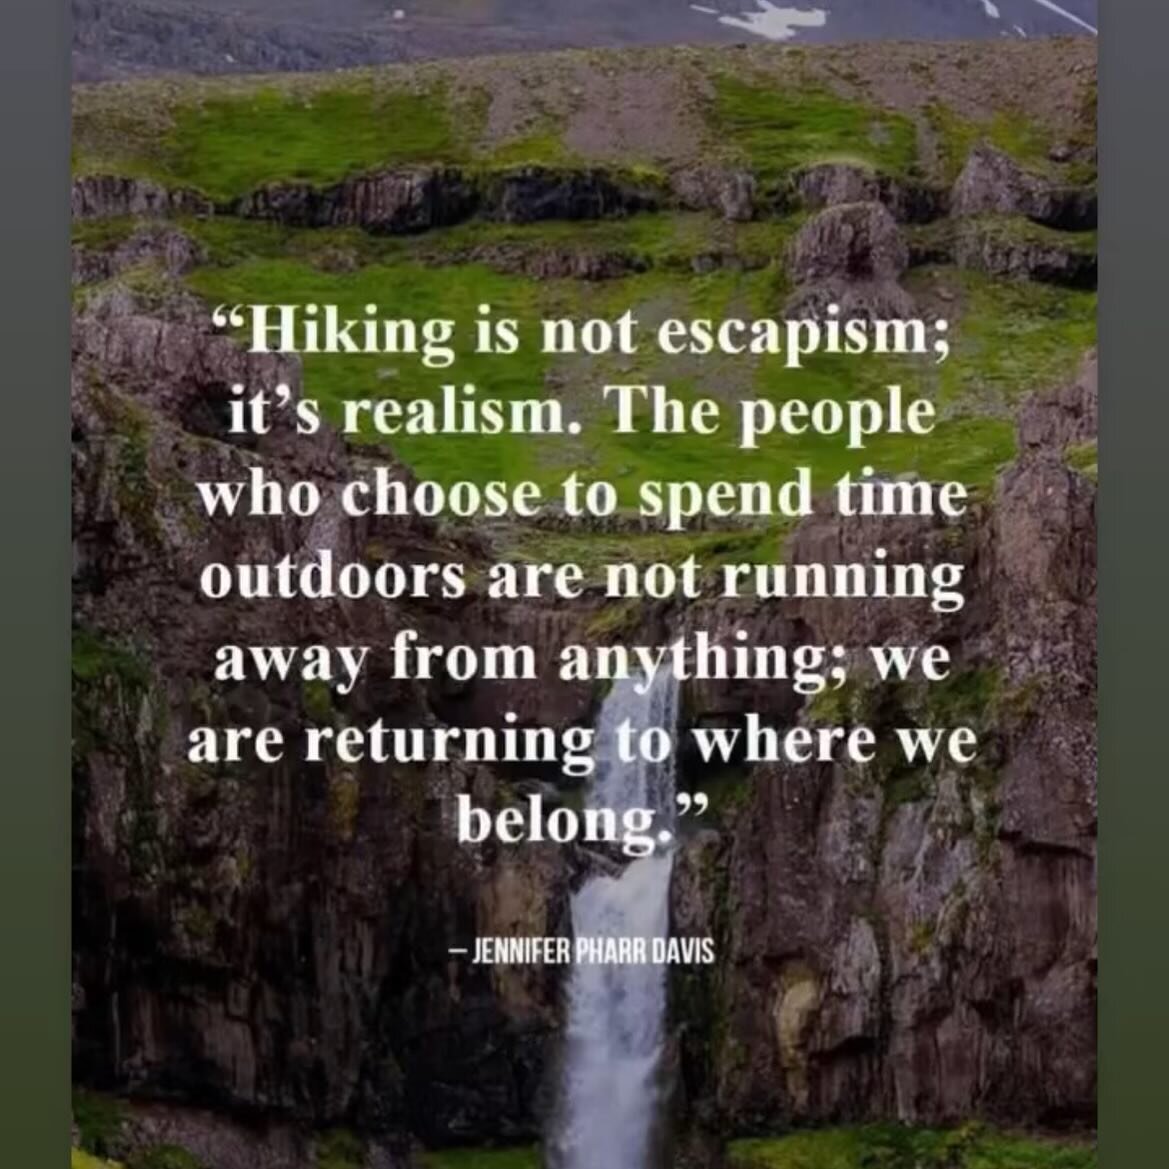 We agree! People feel depressed and anxious when they spend too much time with screens. More time in nature is good for the soul! 
Thanks for the reminder @tristate_in_oh_ky_hiking_event.
#goodforthesoul #hiking #colorado #denverhiking #whattodoinden